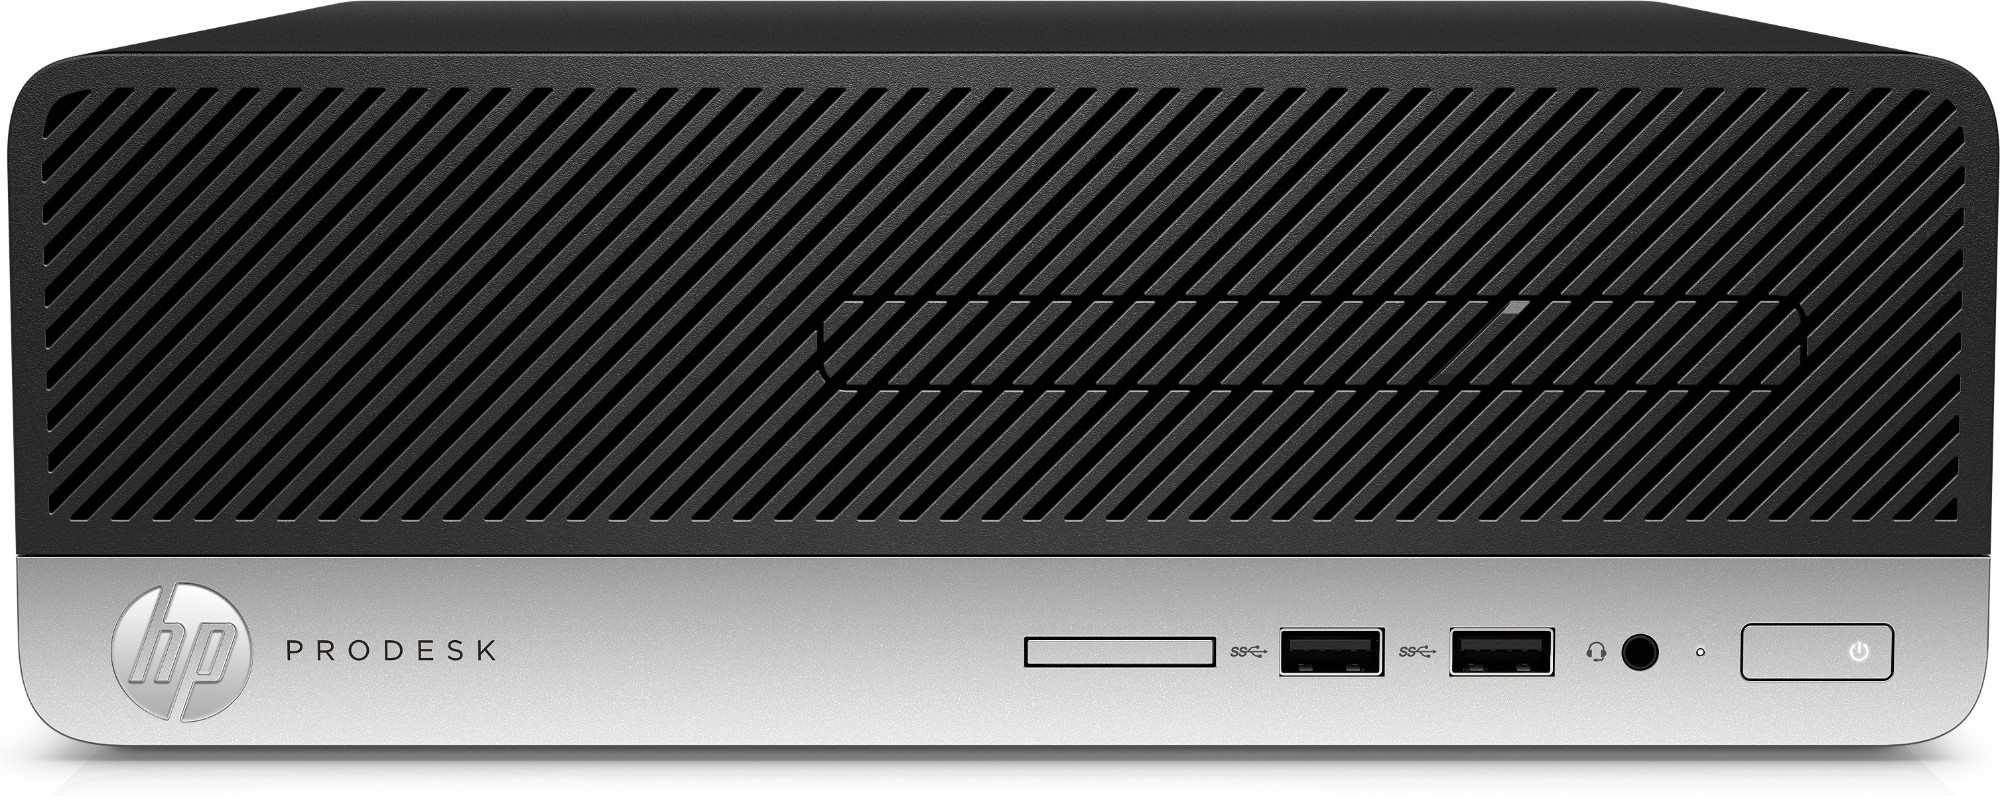 External Hard Drives in stock